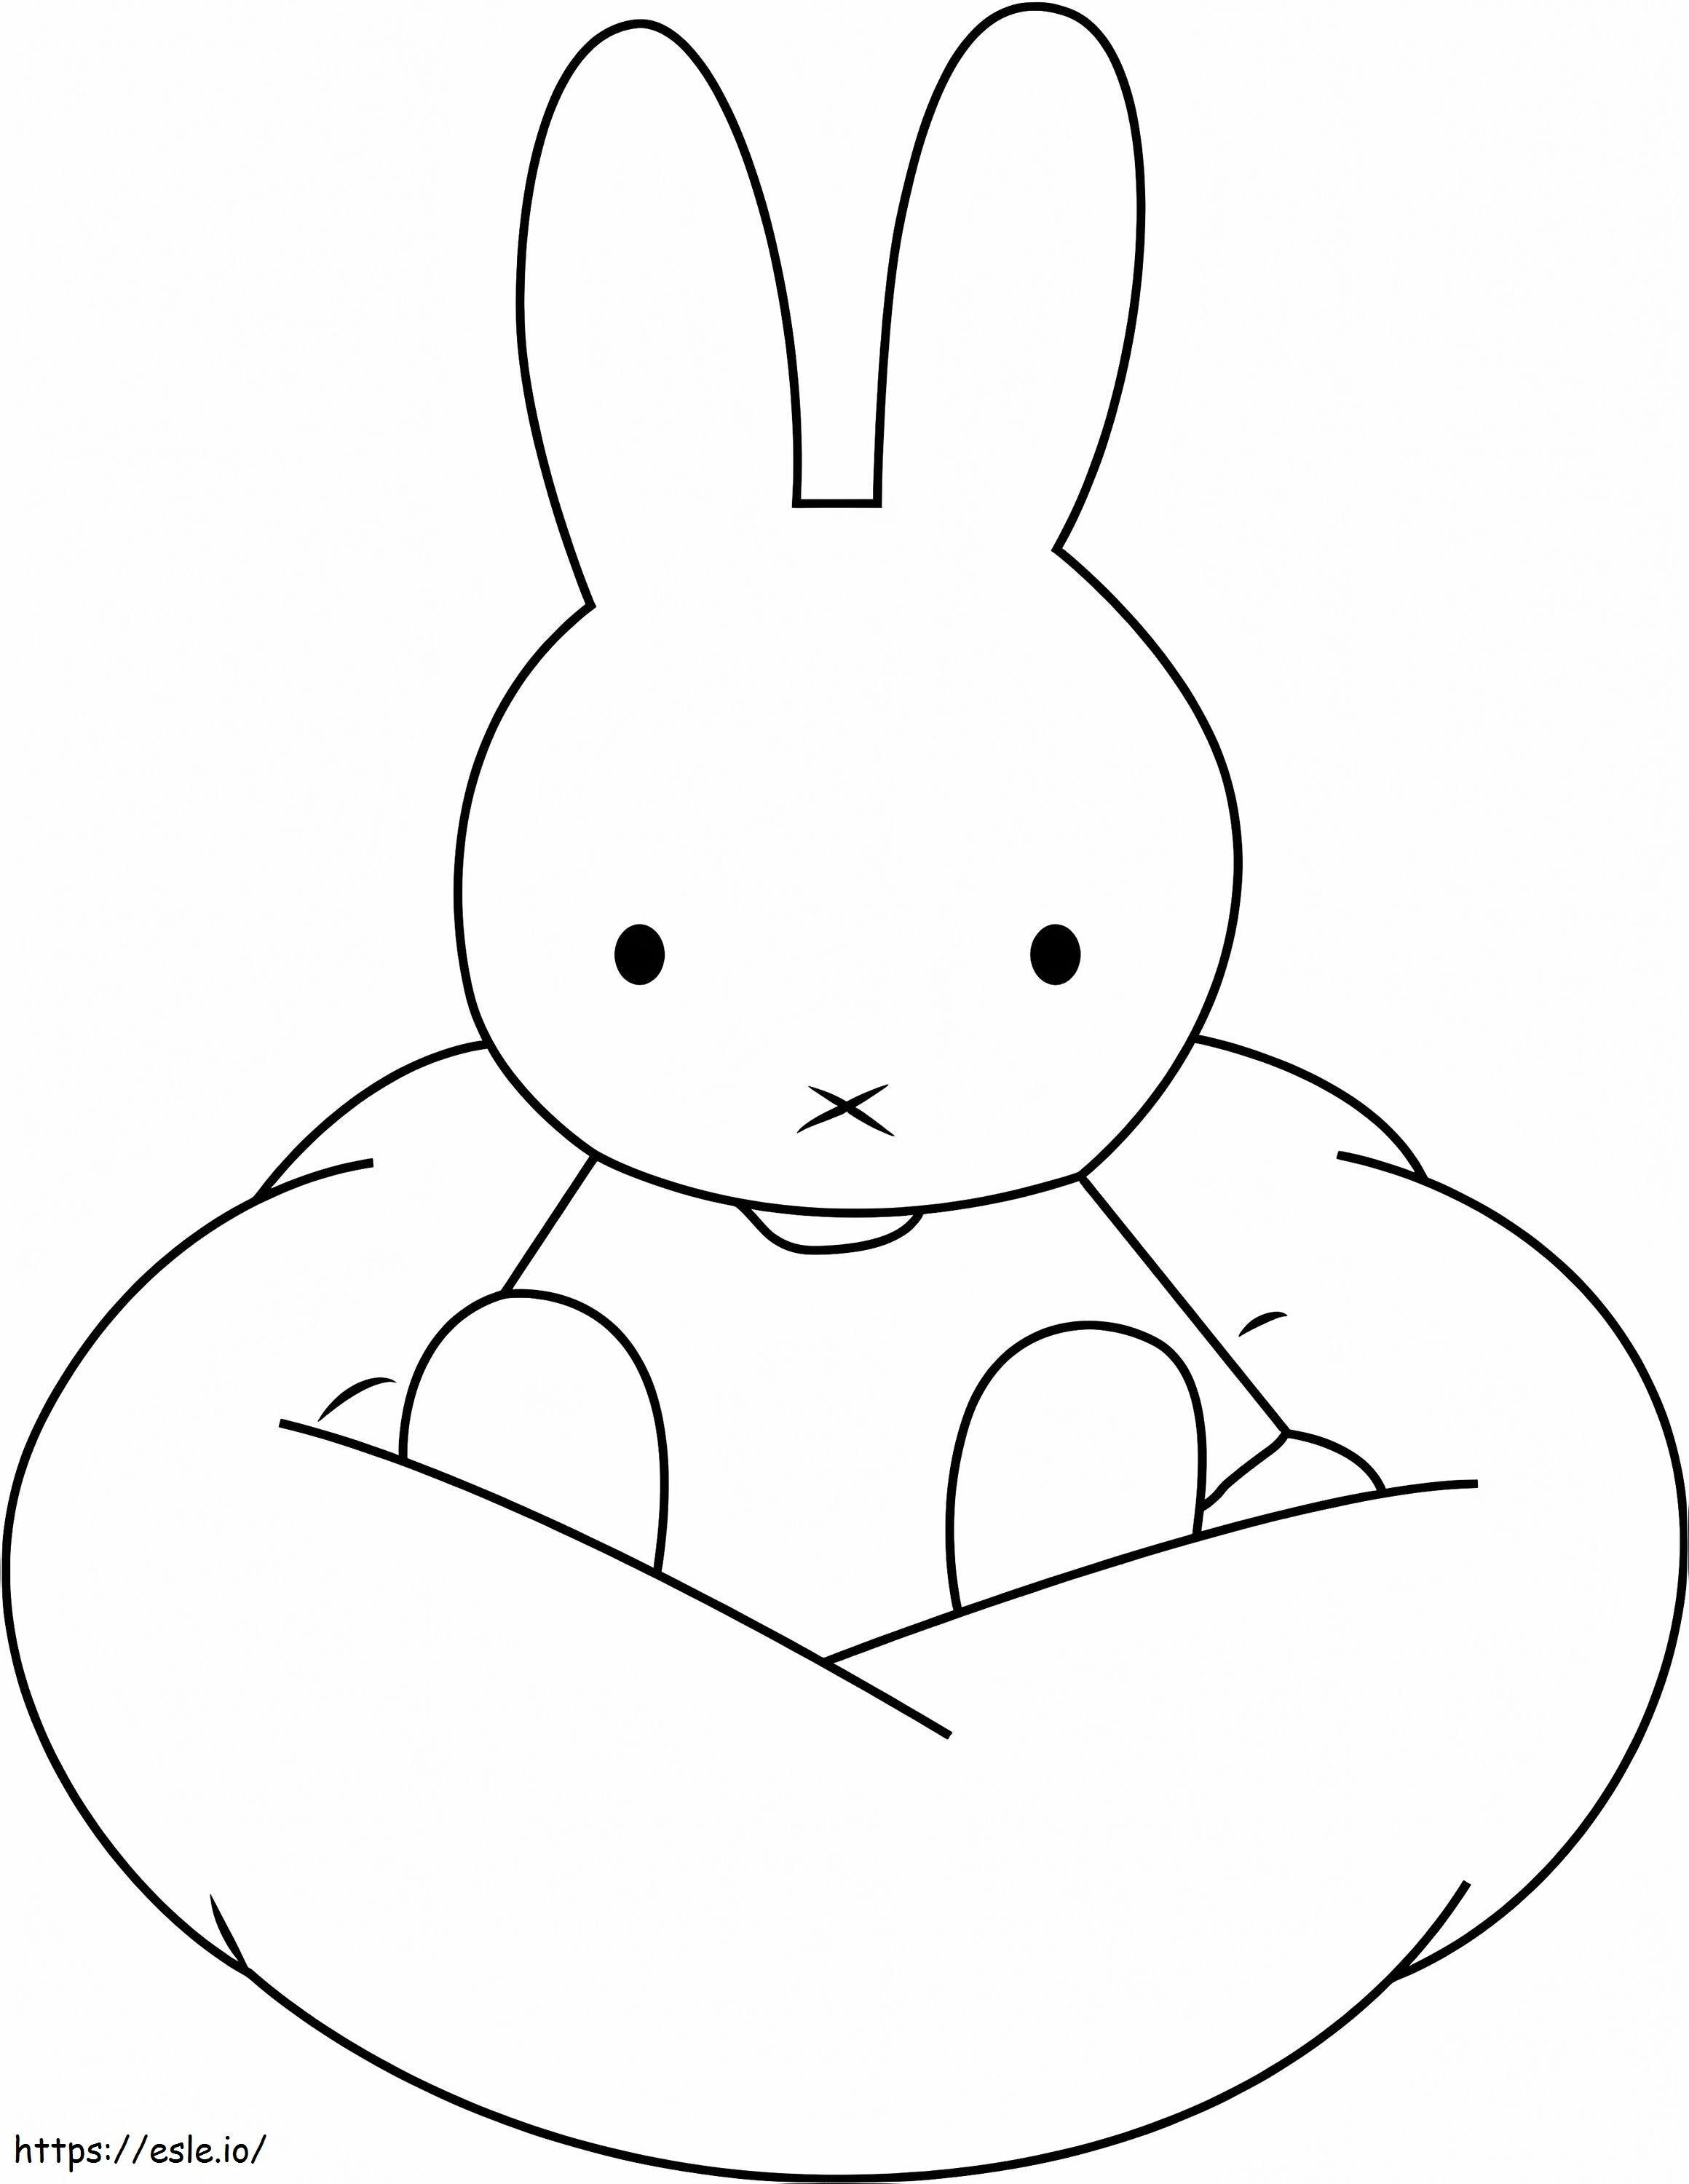 Unnewew coloring page